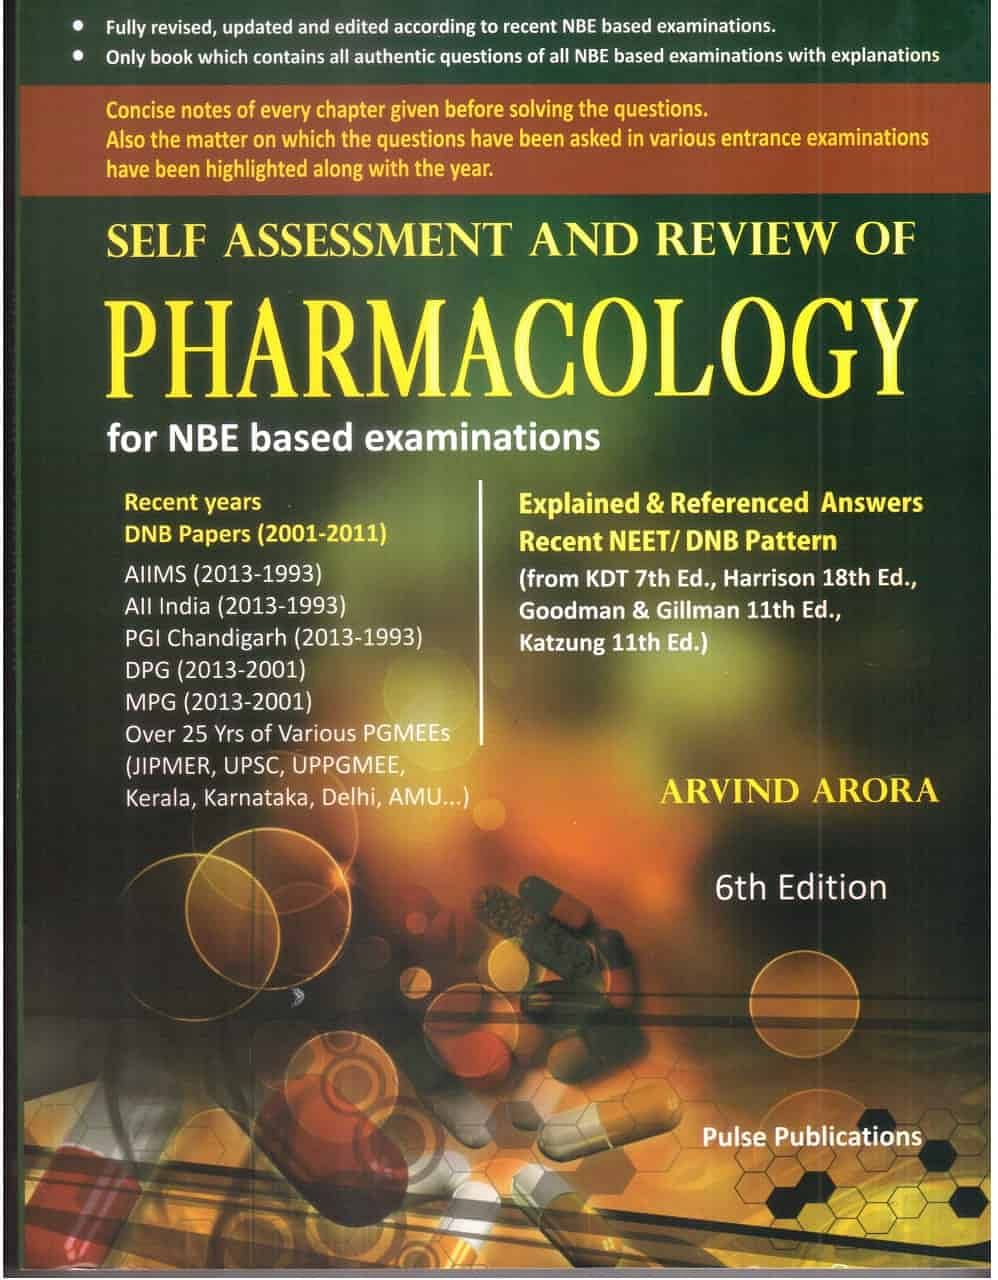 Self-Assessment and Review of Pharmacology by Arvind Arora